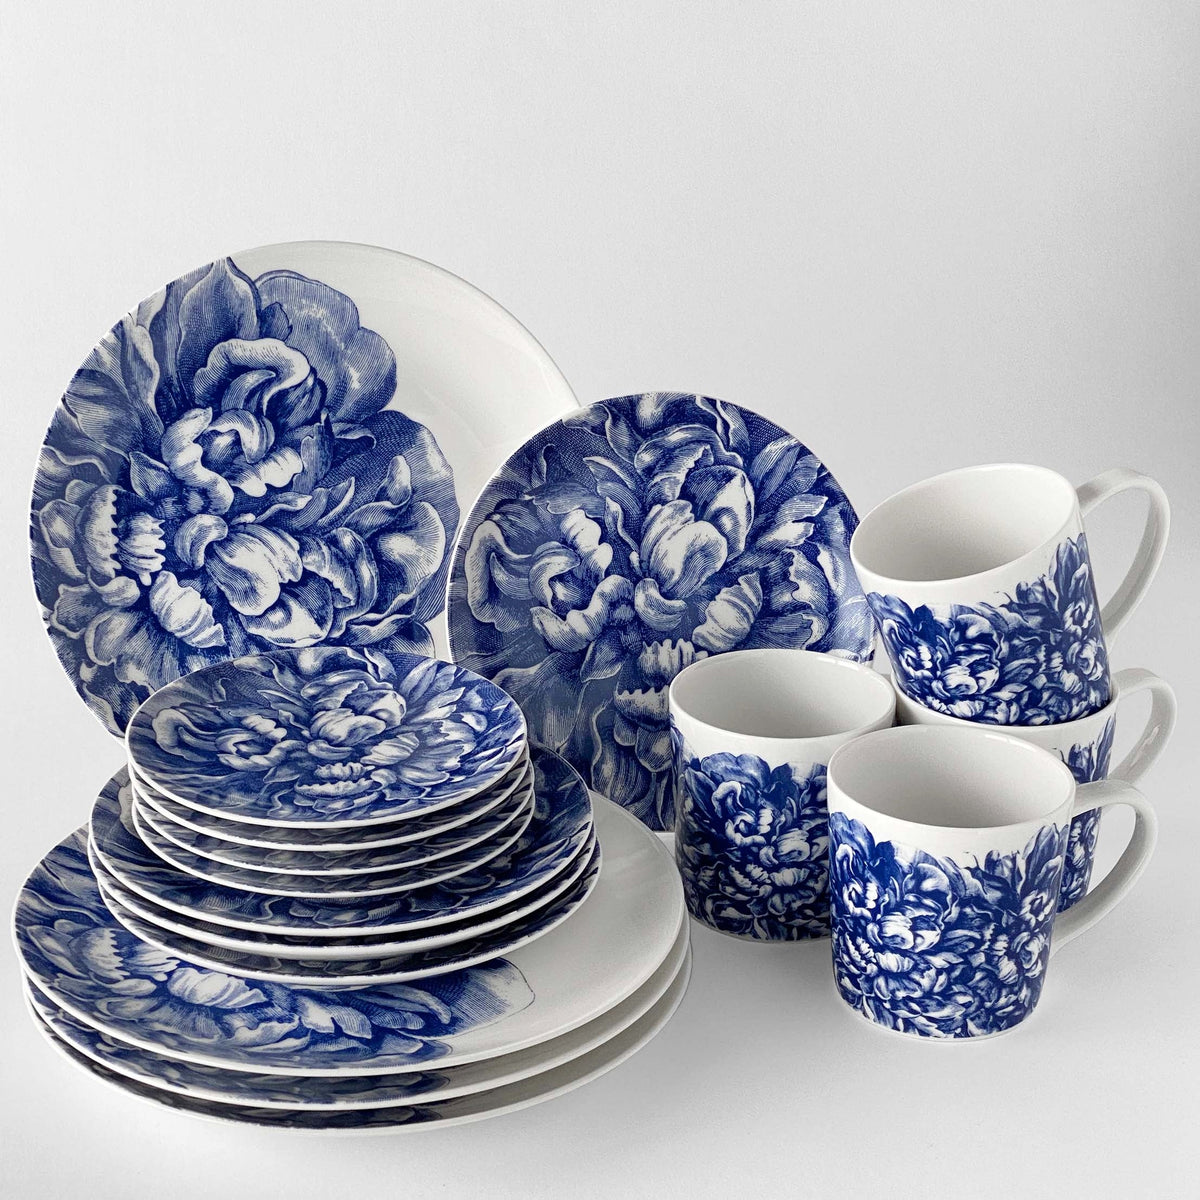 A Peony Bloom Blue Coupe Dinner Plate by Caskata Artisanal Home, a porcelain dinnerware set with a blue and white floral peony pattern.